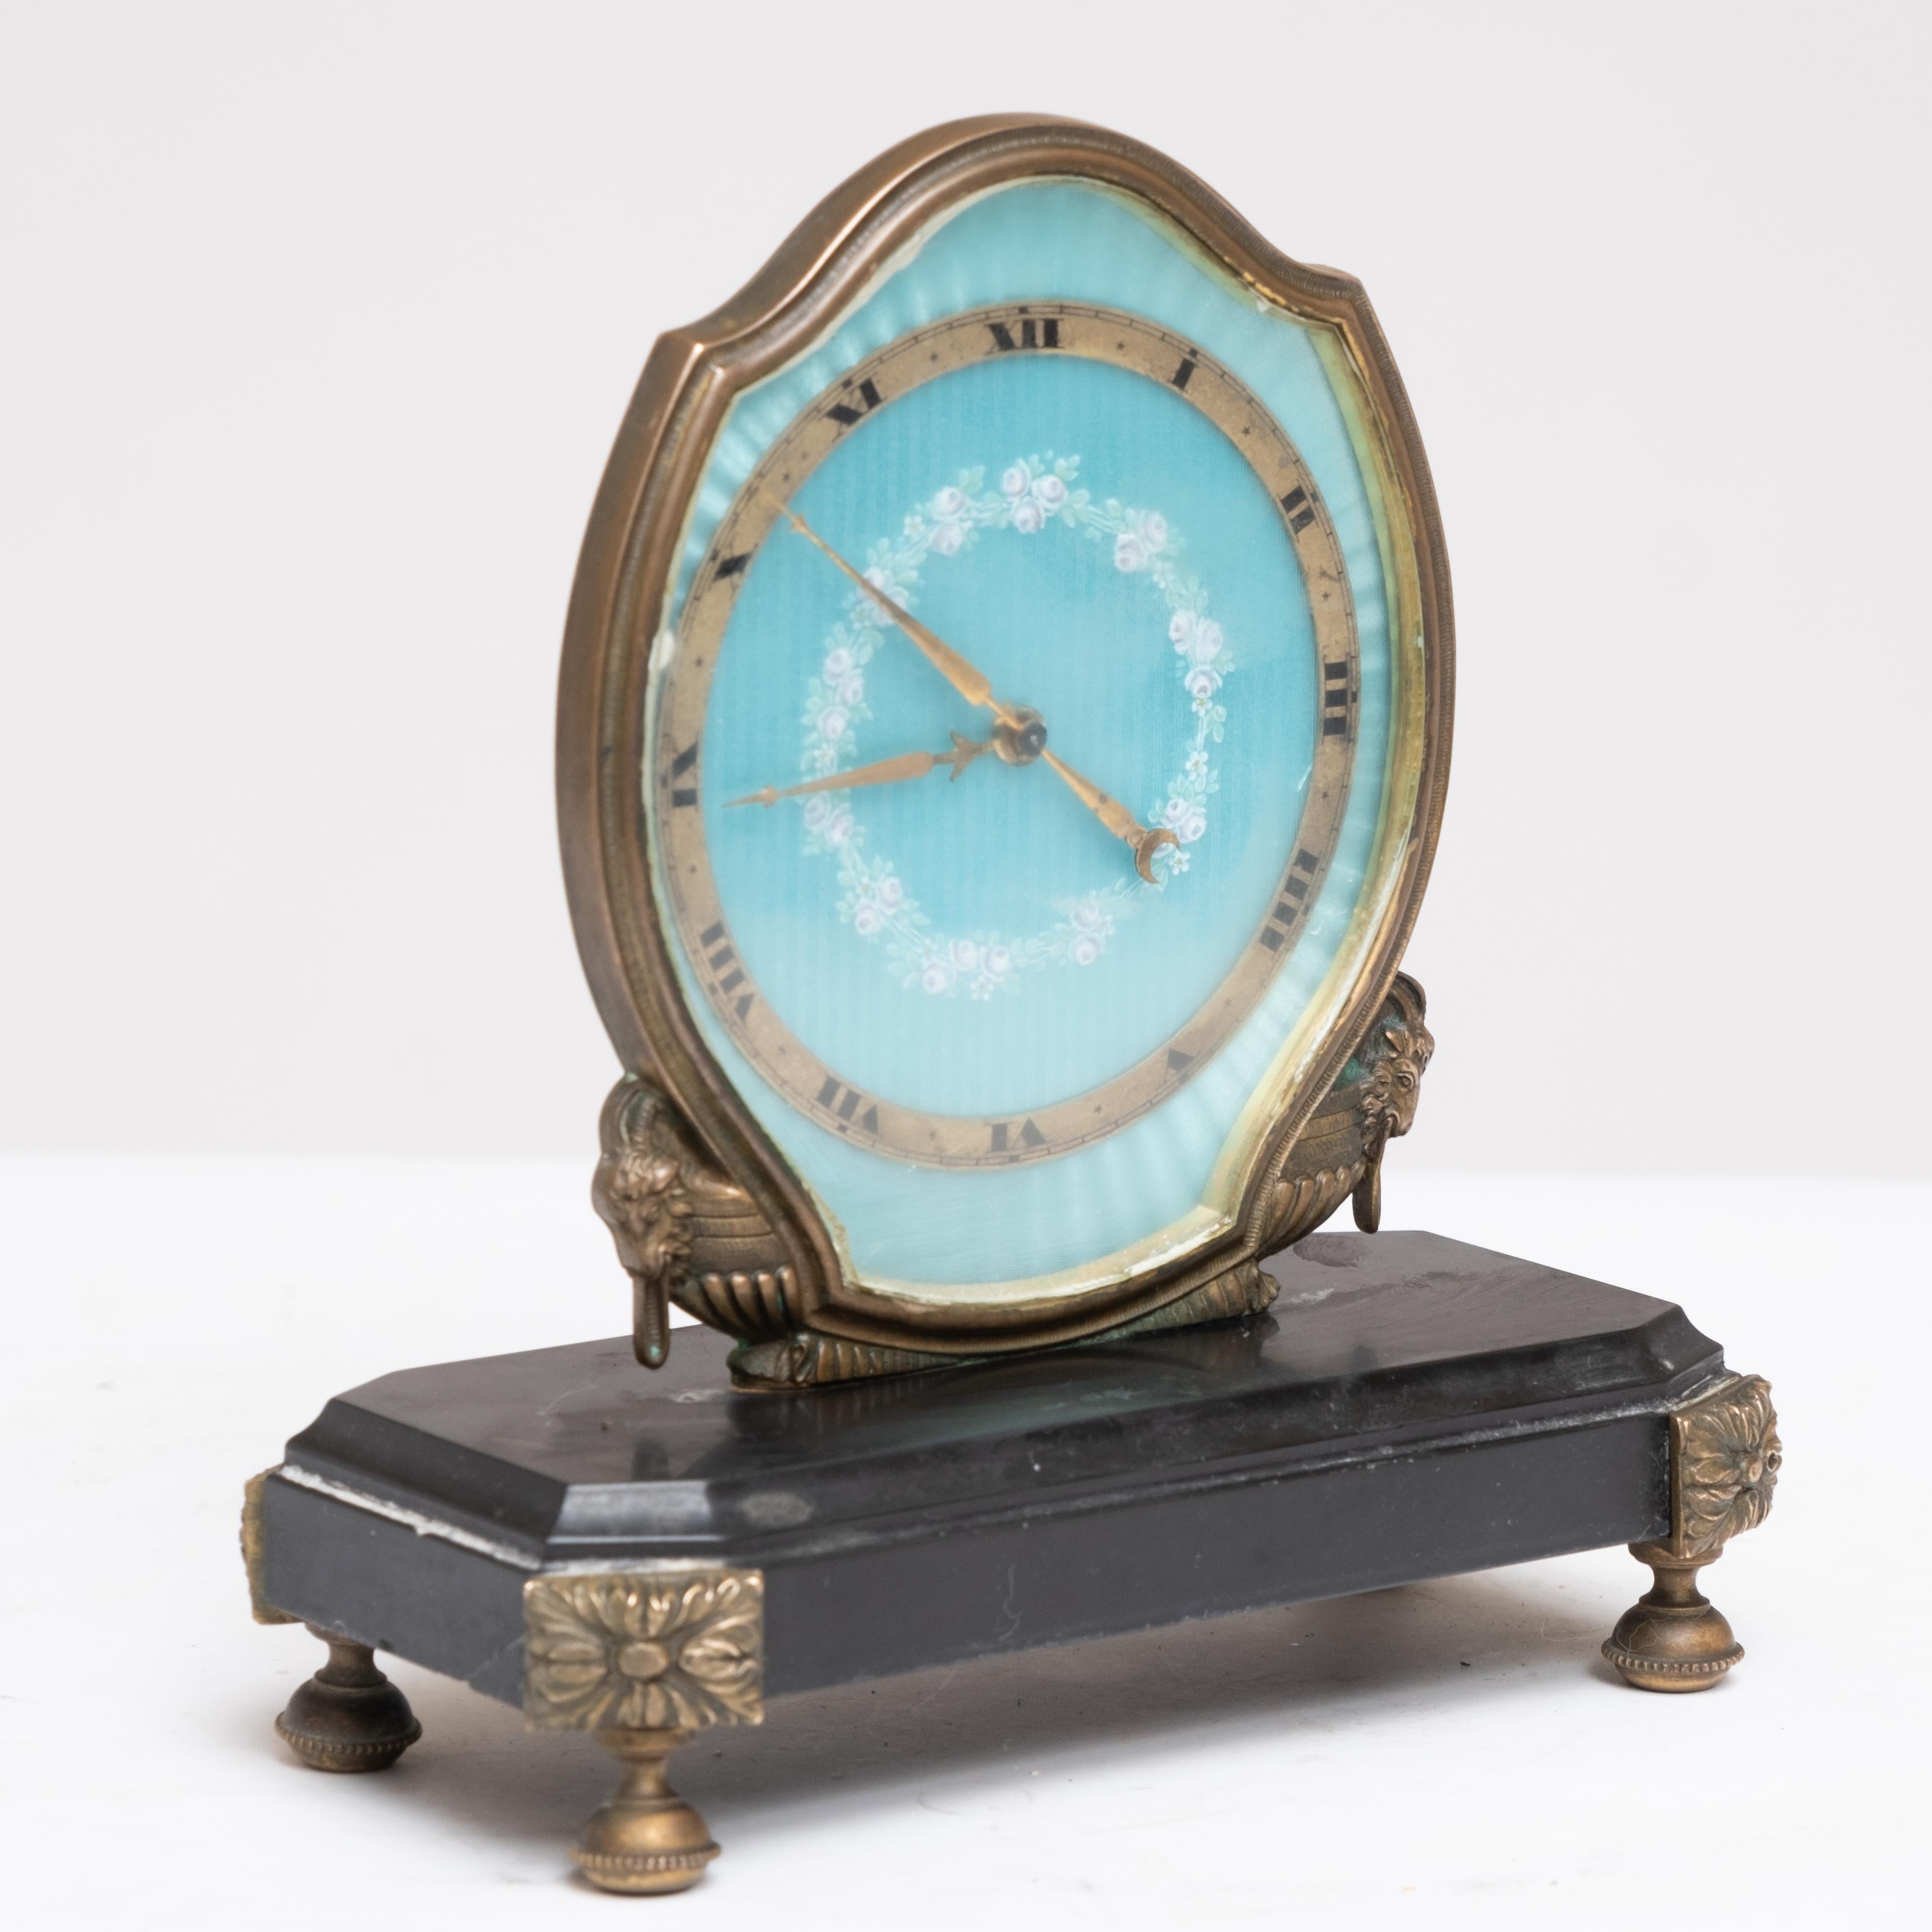 Art Deco Gubelin eight-day desk clock with sonnerie chimes, originating from Switzerland in the early 20th century. This timepiece features a light blue guilloche face, beautifully enameled with pink and green flower depictions. The clock has ormolu